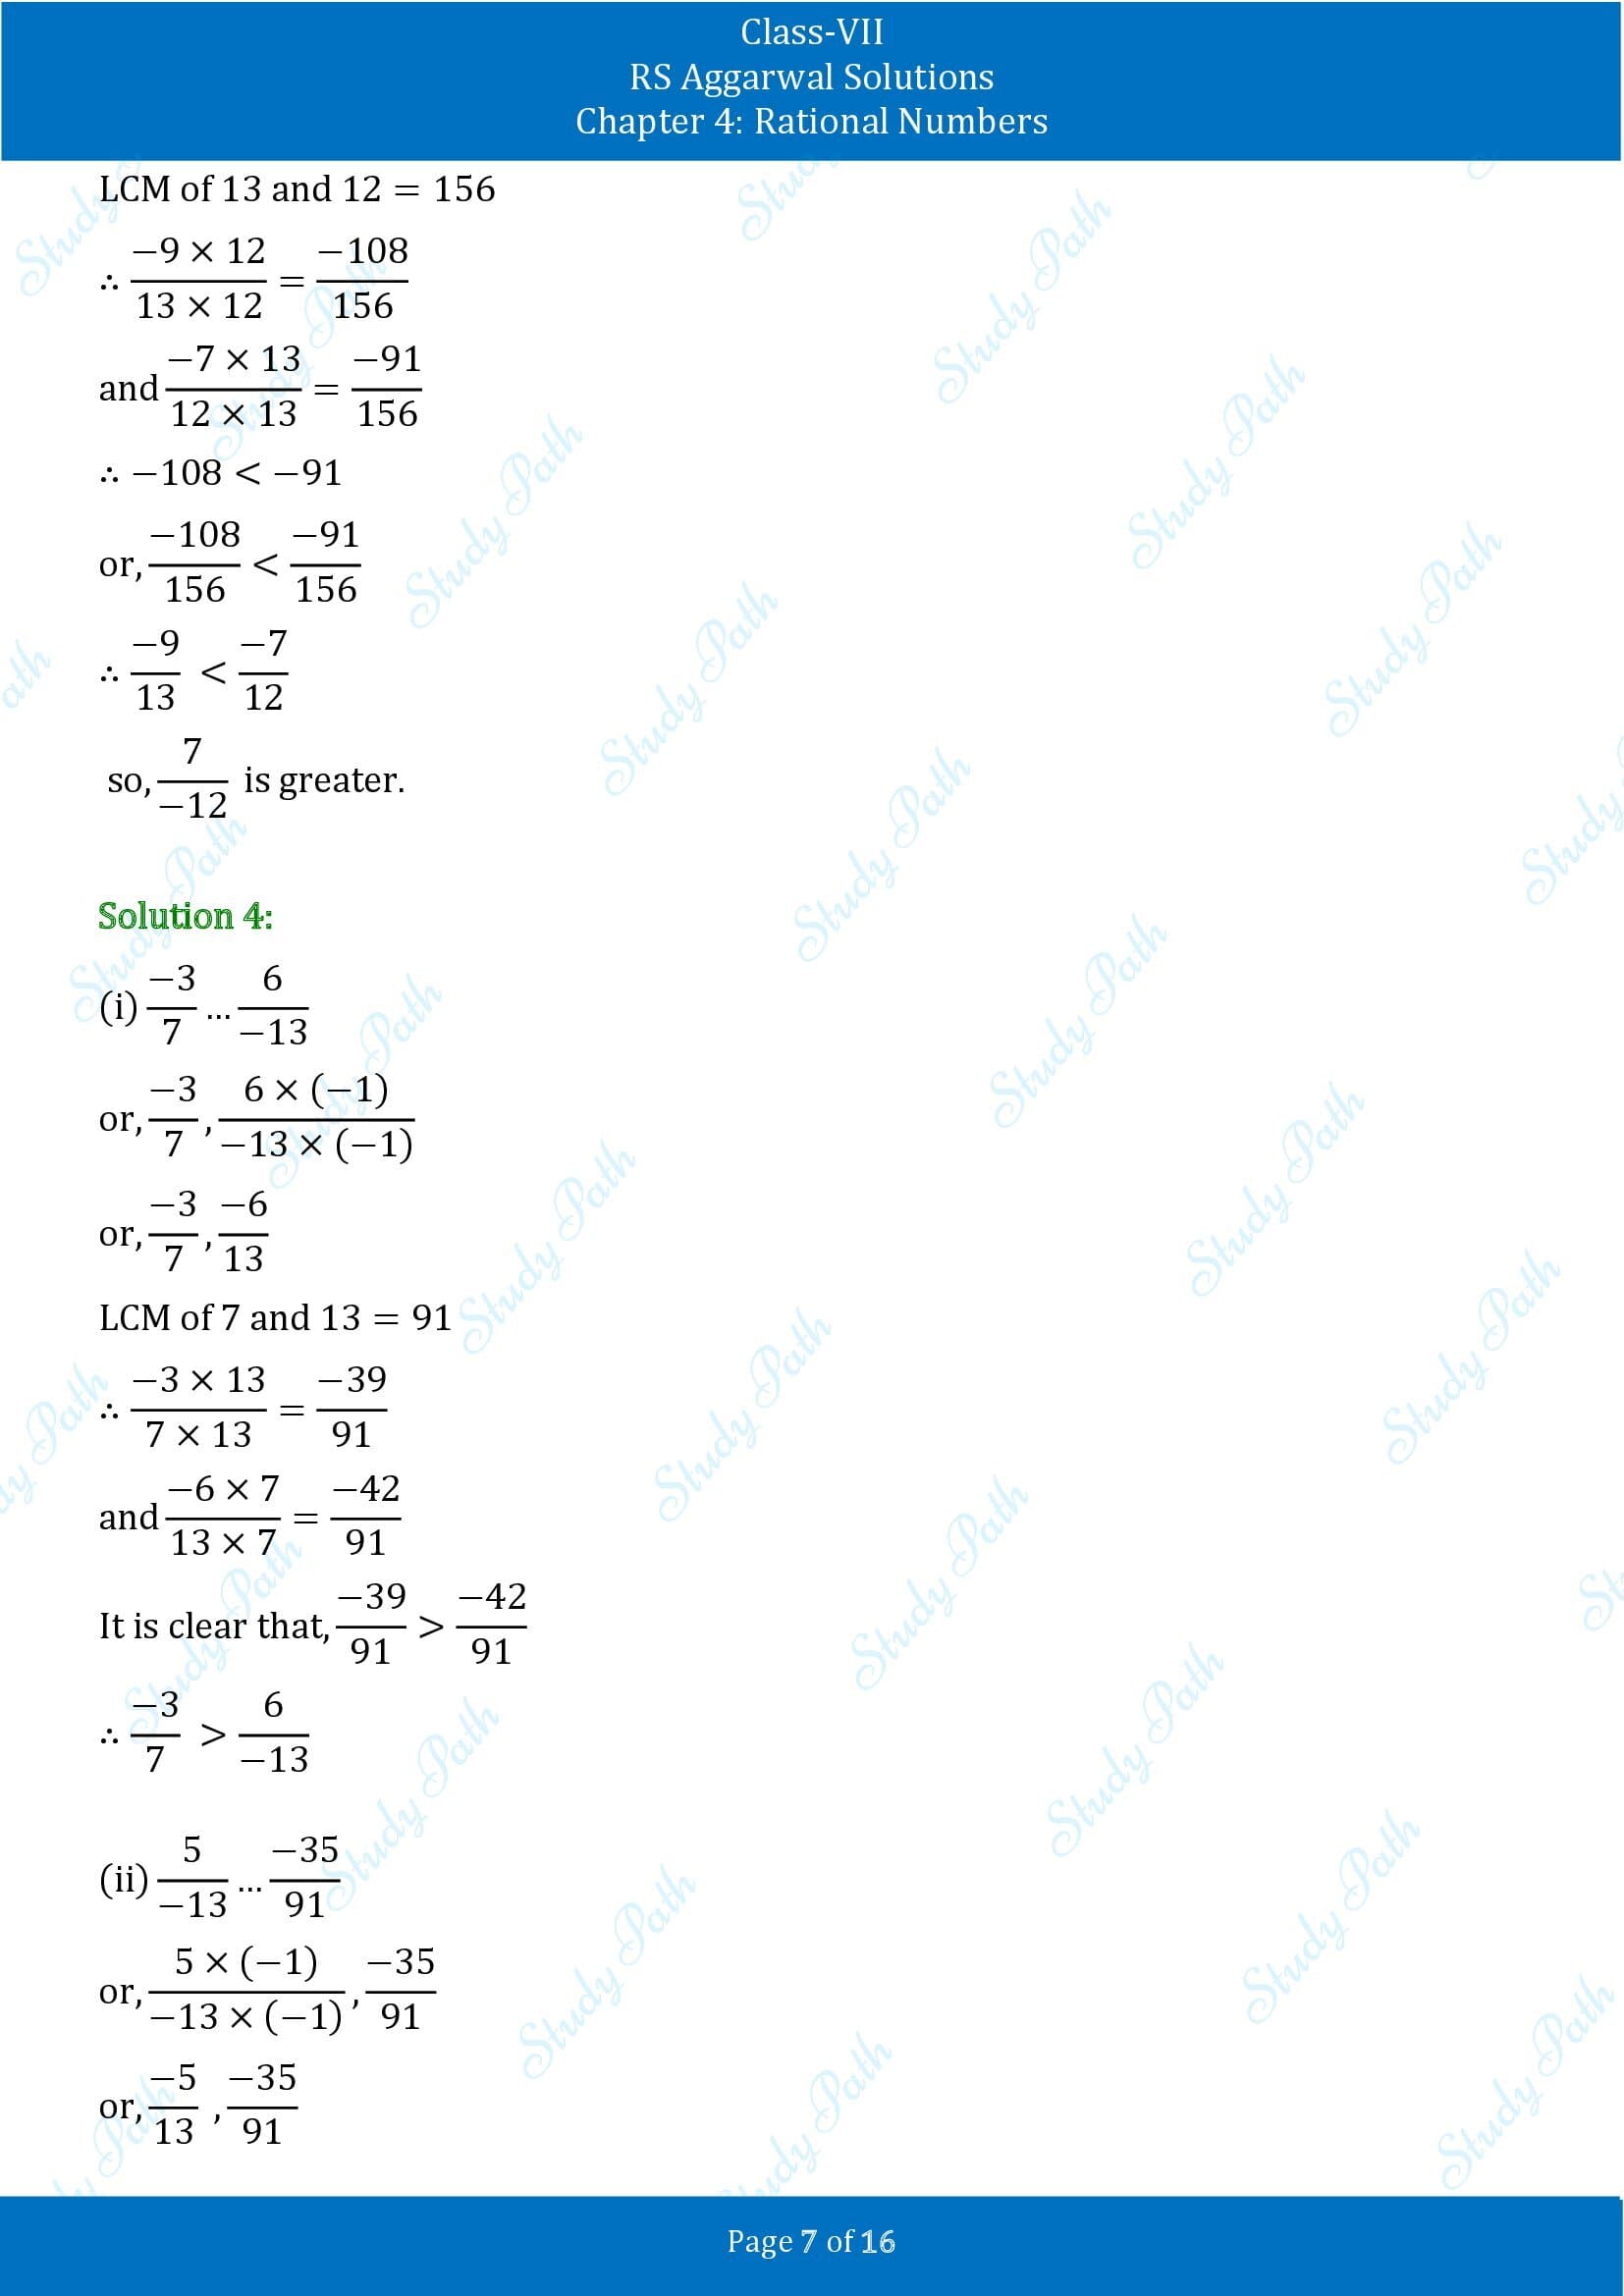 RS Aggarwal Solutions Class 7 Chapter 4 Rational Numbers Exercise 4B 00007